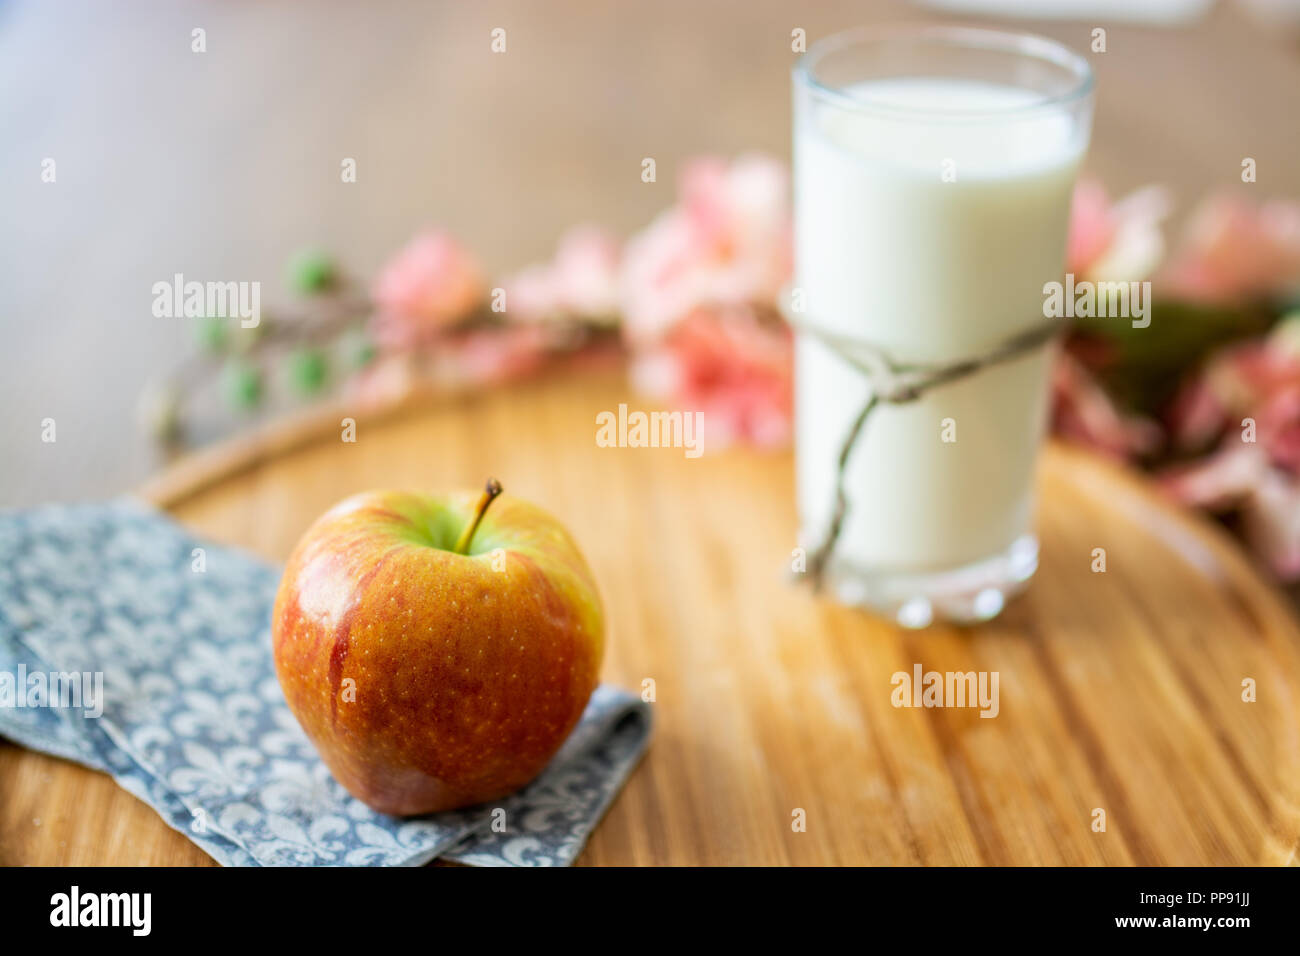 Healthy Breakfast. Milk and apple on wooden background. Health and diet concept. Stock Photo